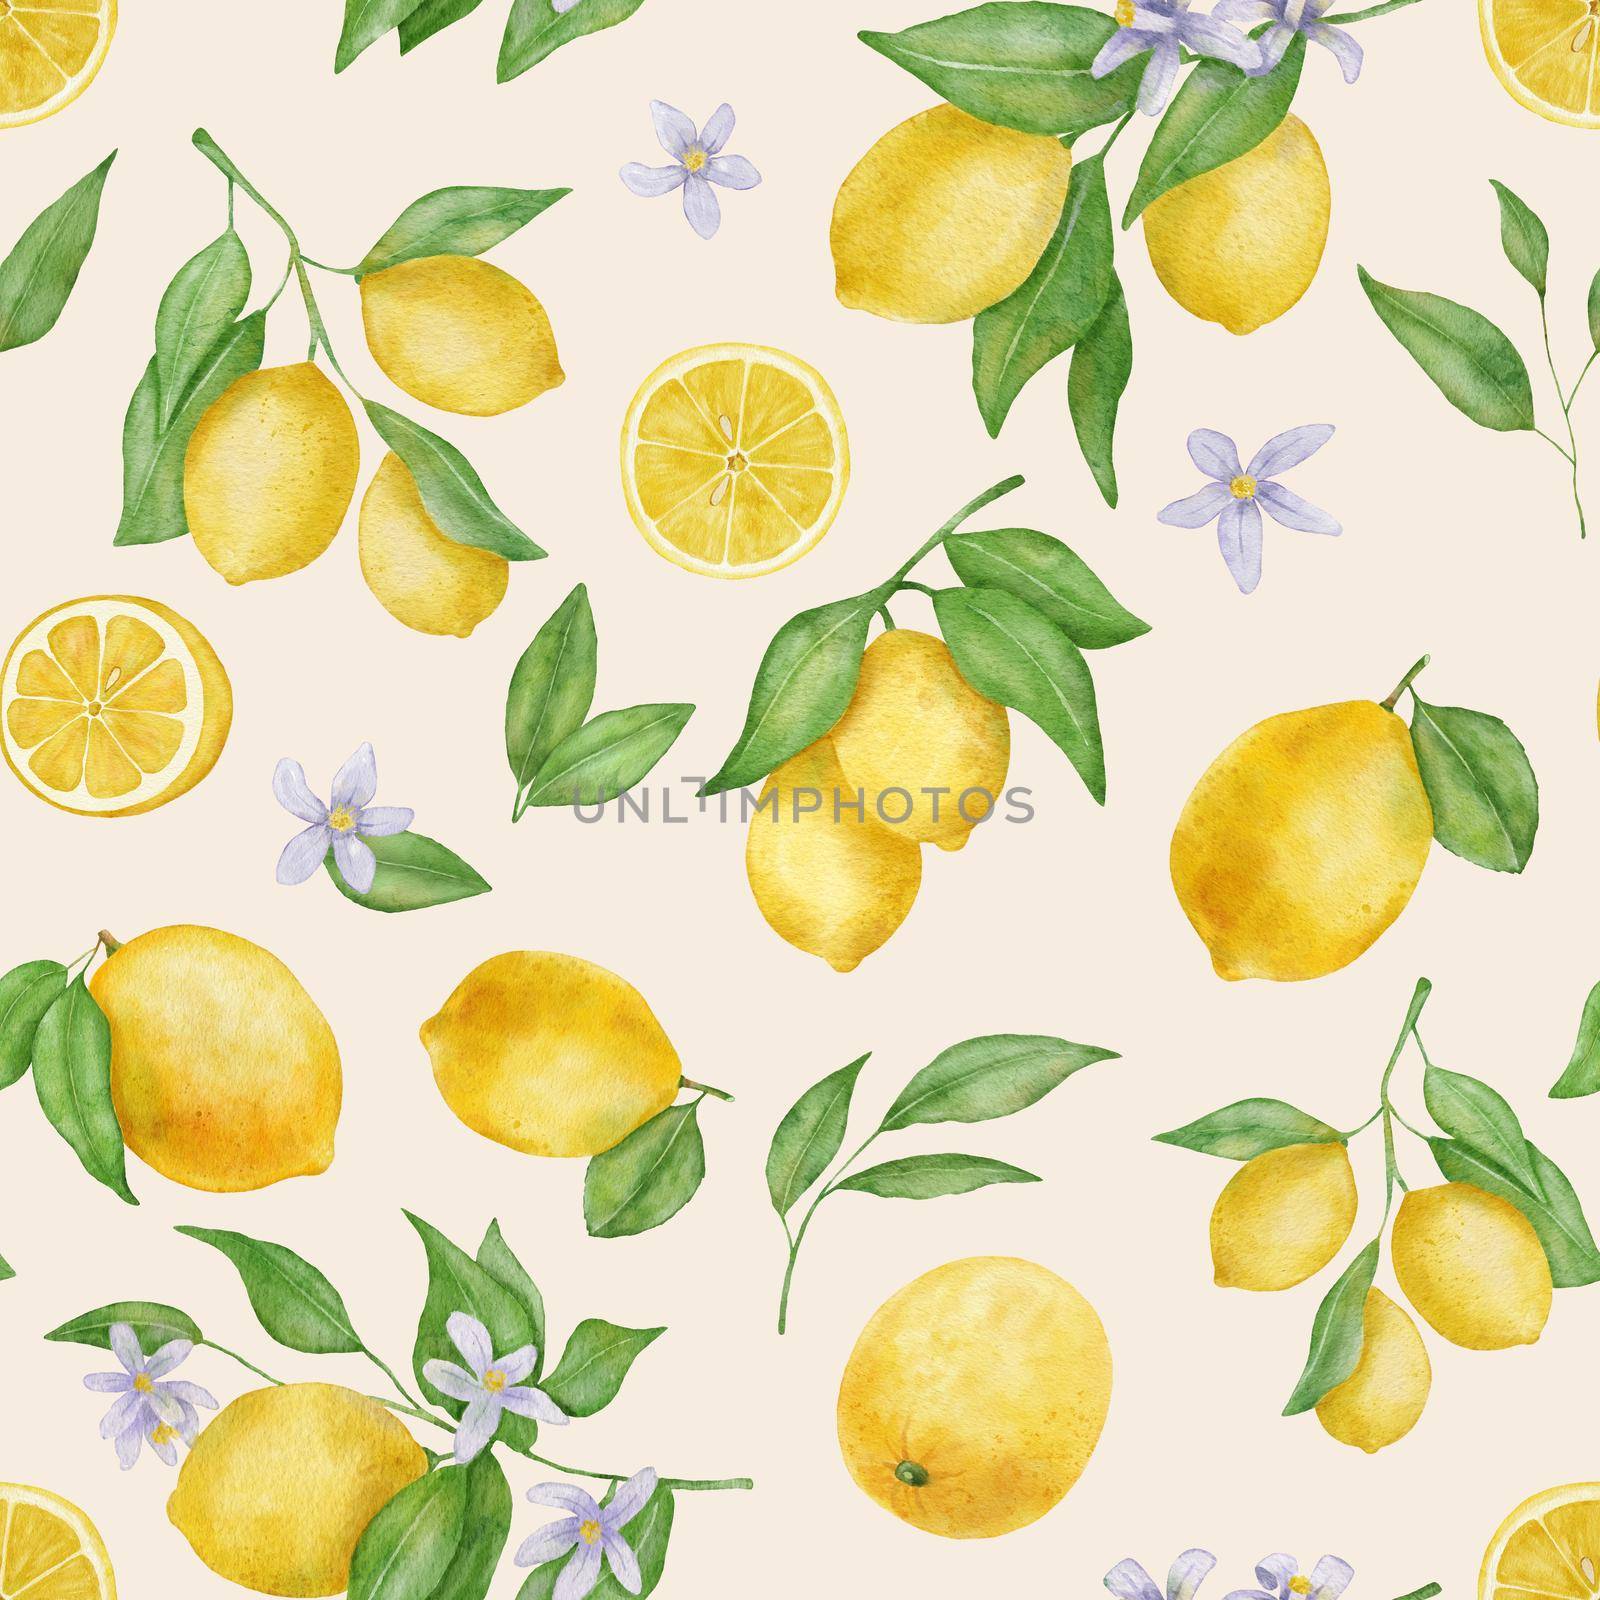 Lemon fruits with leaves and flower watercolor seamless pattern on beige background by ElenaPlatova